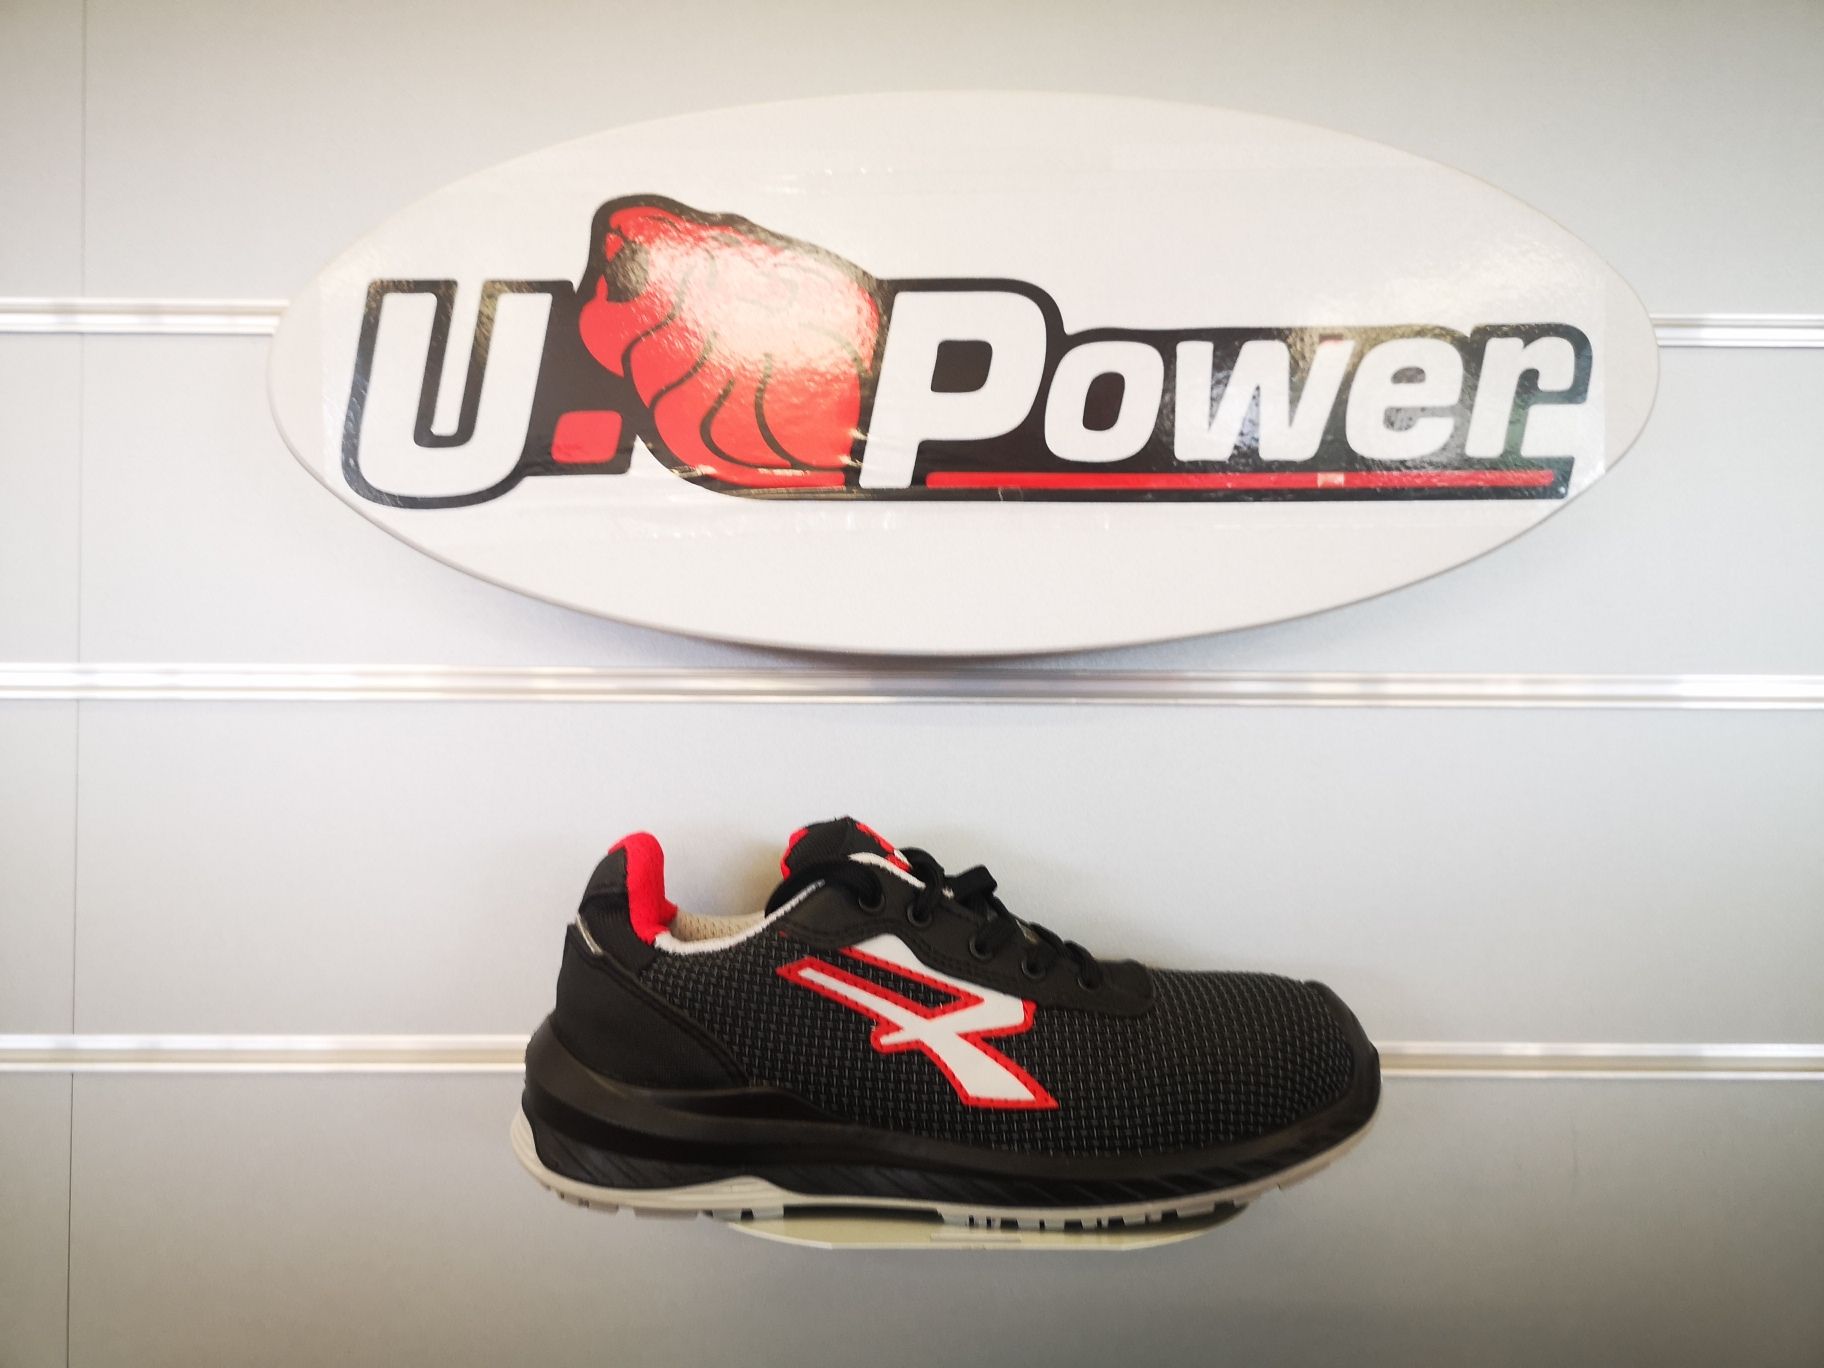 LISBONA UPOWER SCARPA ANTINF.CE ESD S3